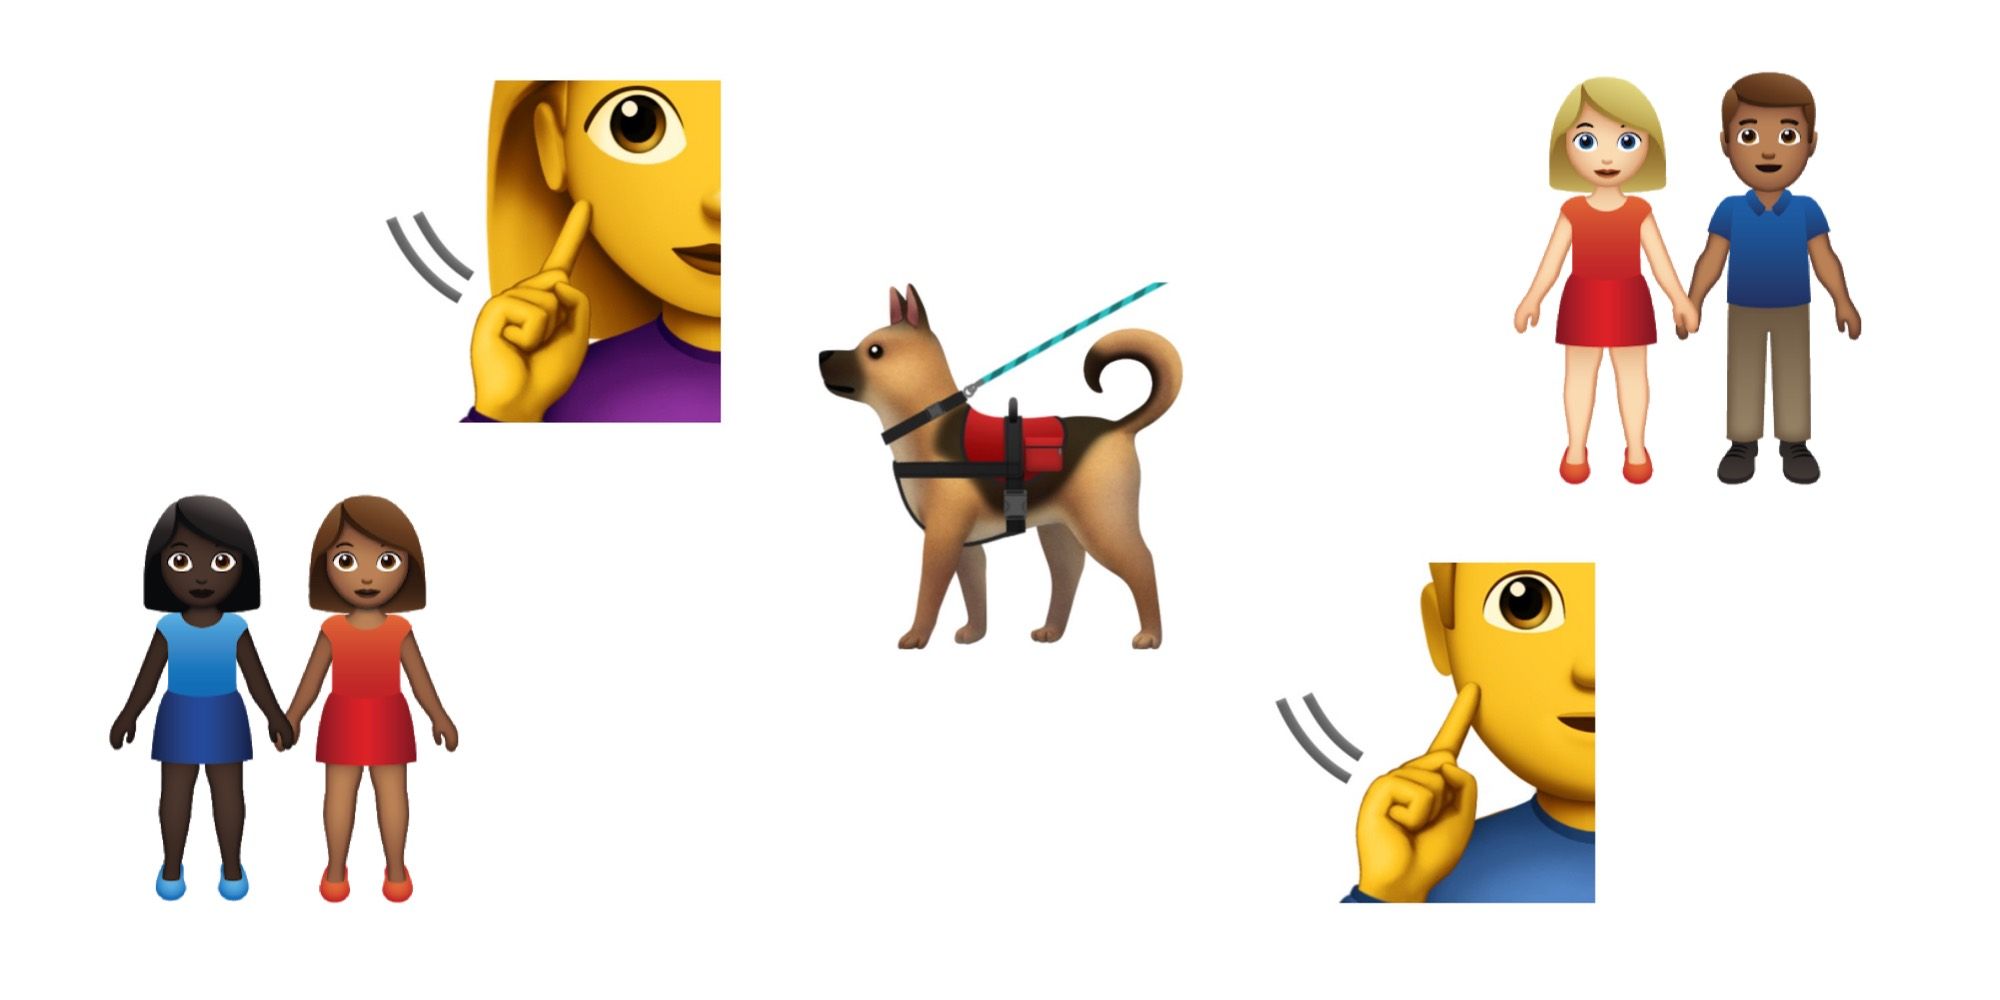 Service Dog, Deaf Person, Couples added to 2019 Emoji List